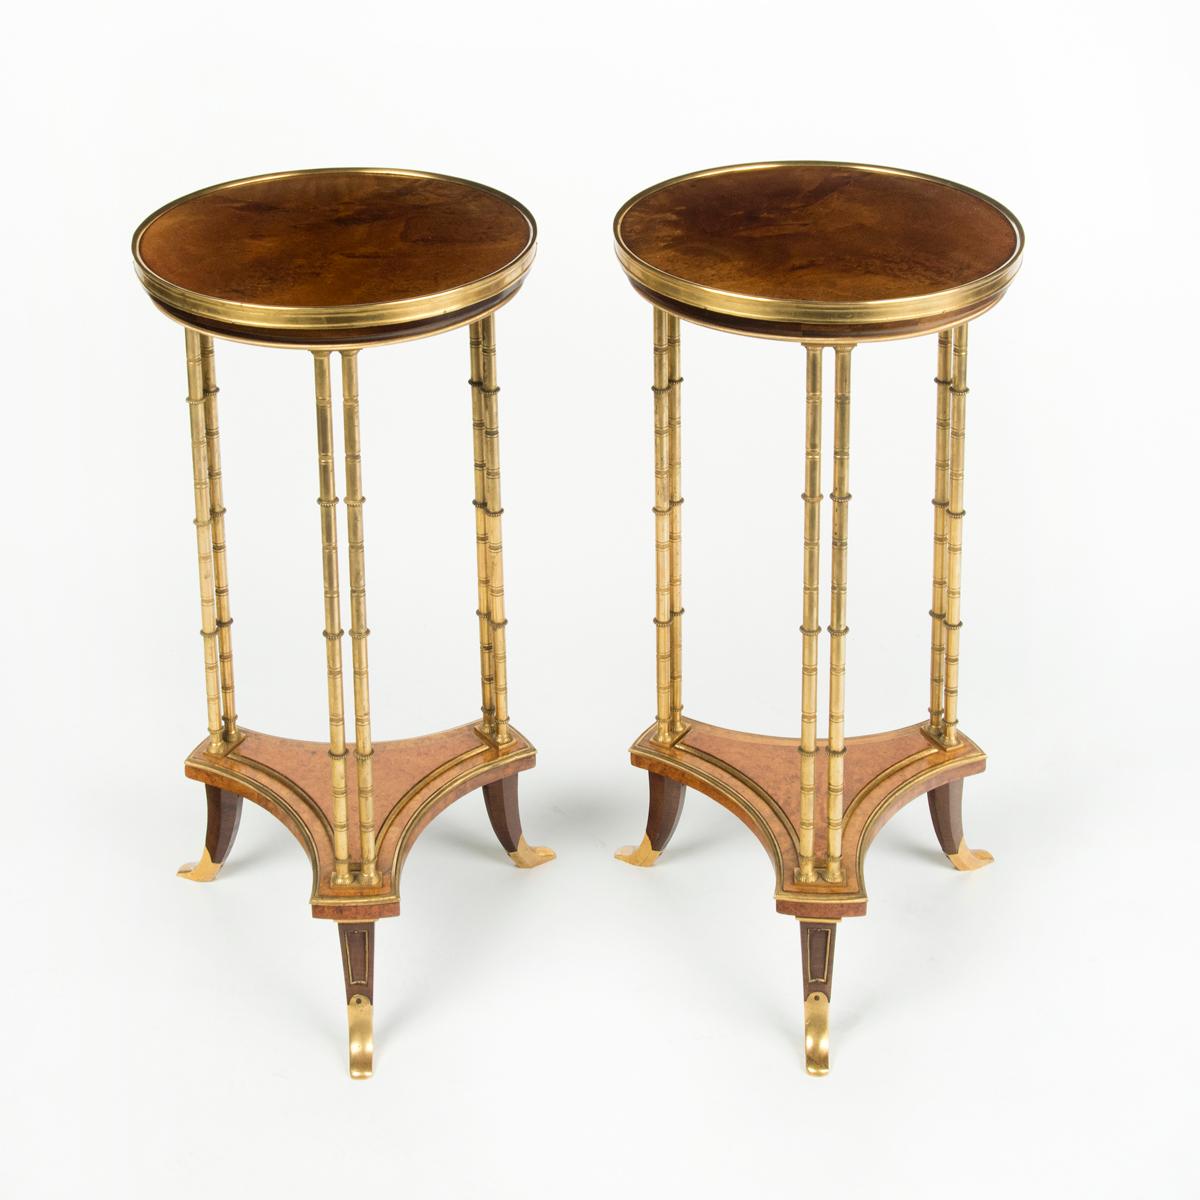 Early 20th Century A pair of Louis XVI style mahogany and ormolu gueridons, after Adam Weisweiler For Sale